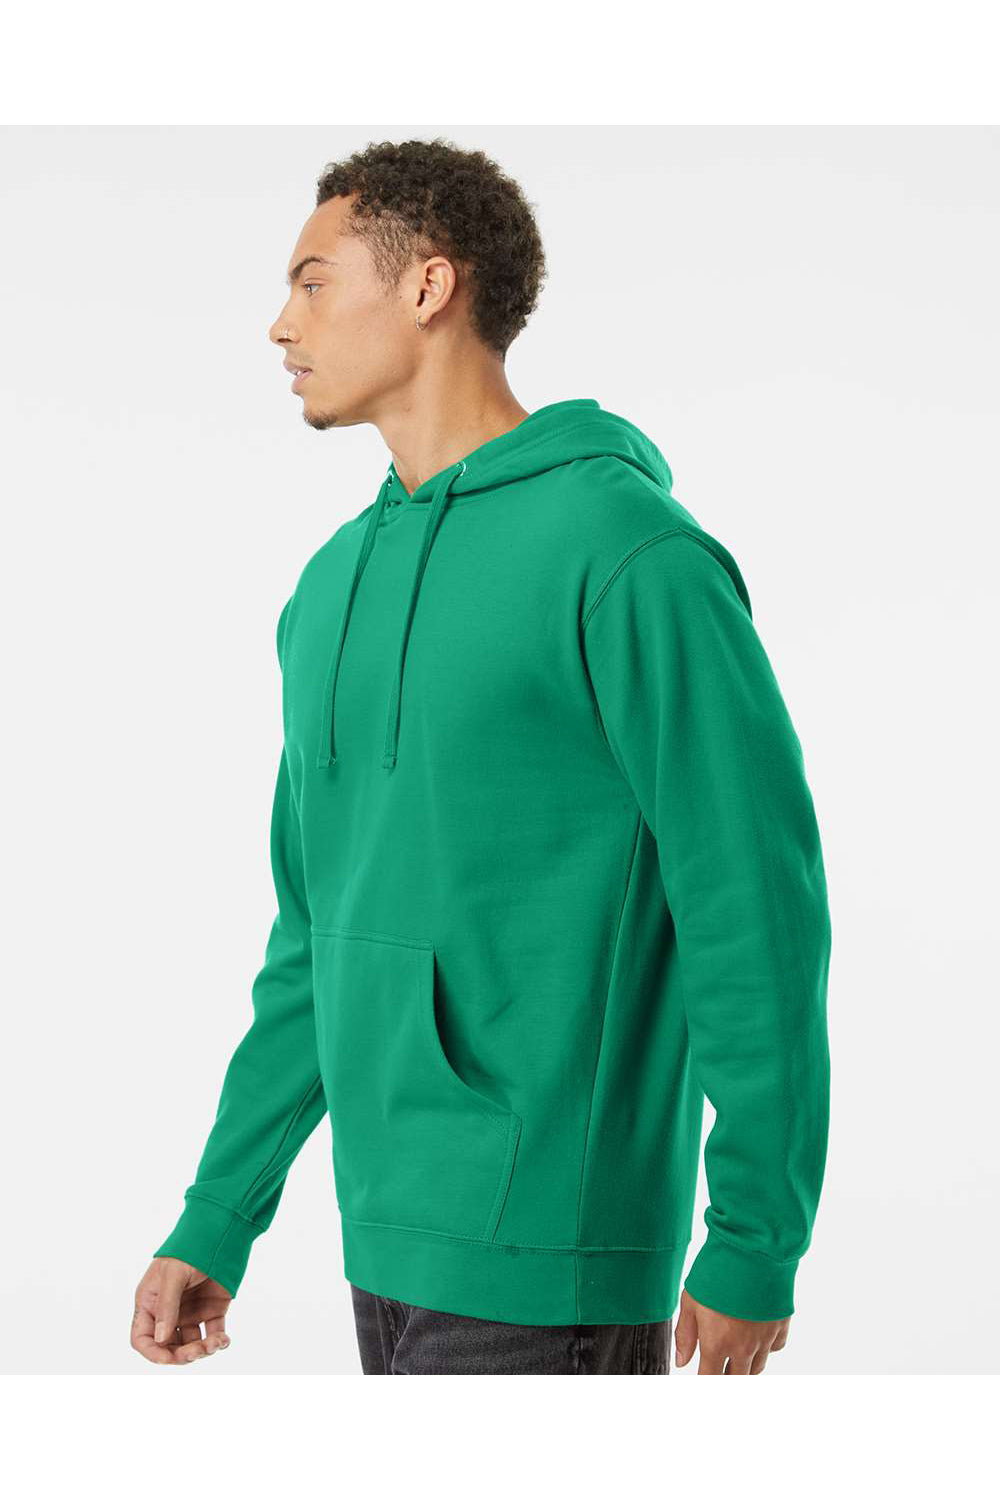 Independent Trading Co. SS4500 Mens Hooded Sweatshirt Hoodie Kelly Green Model Side